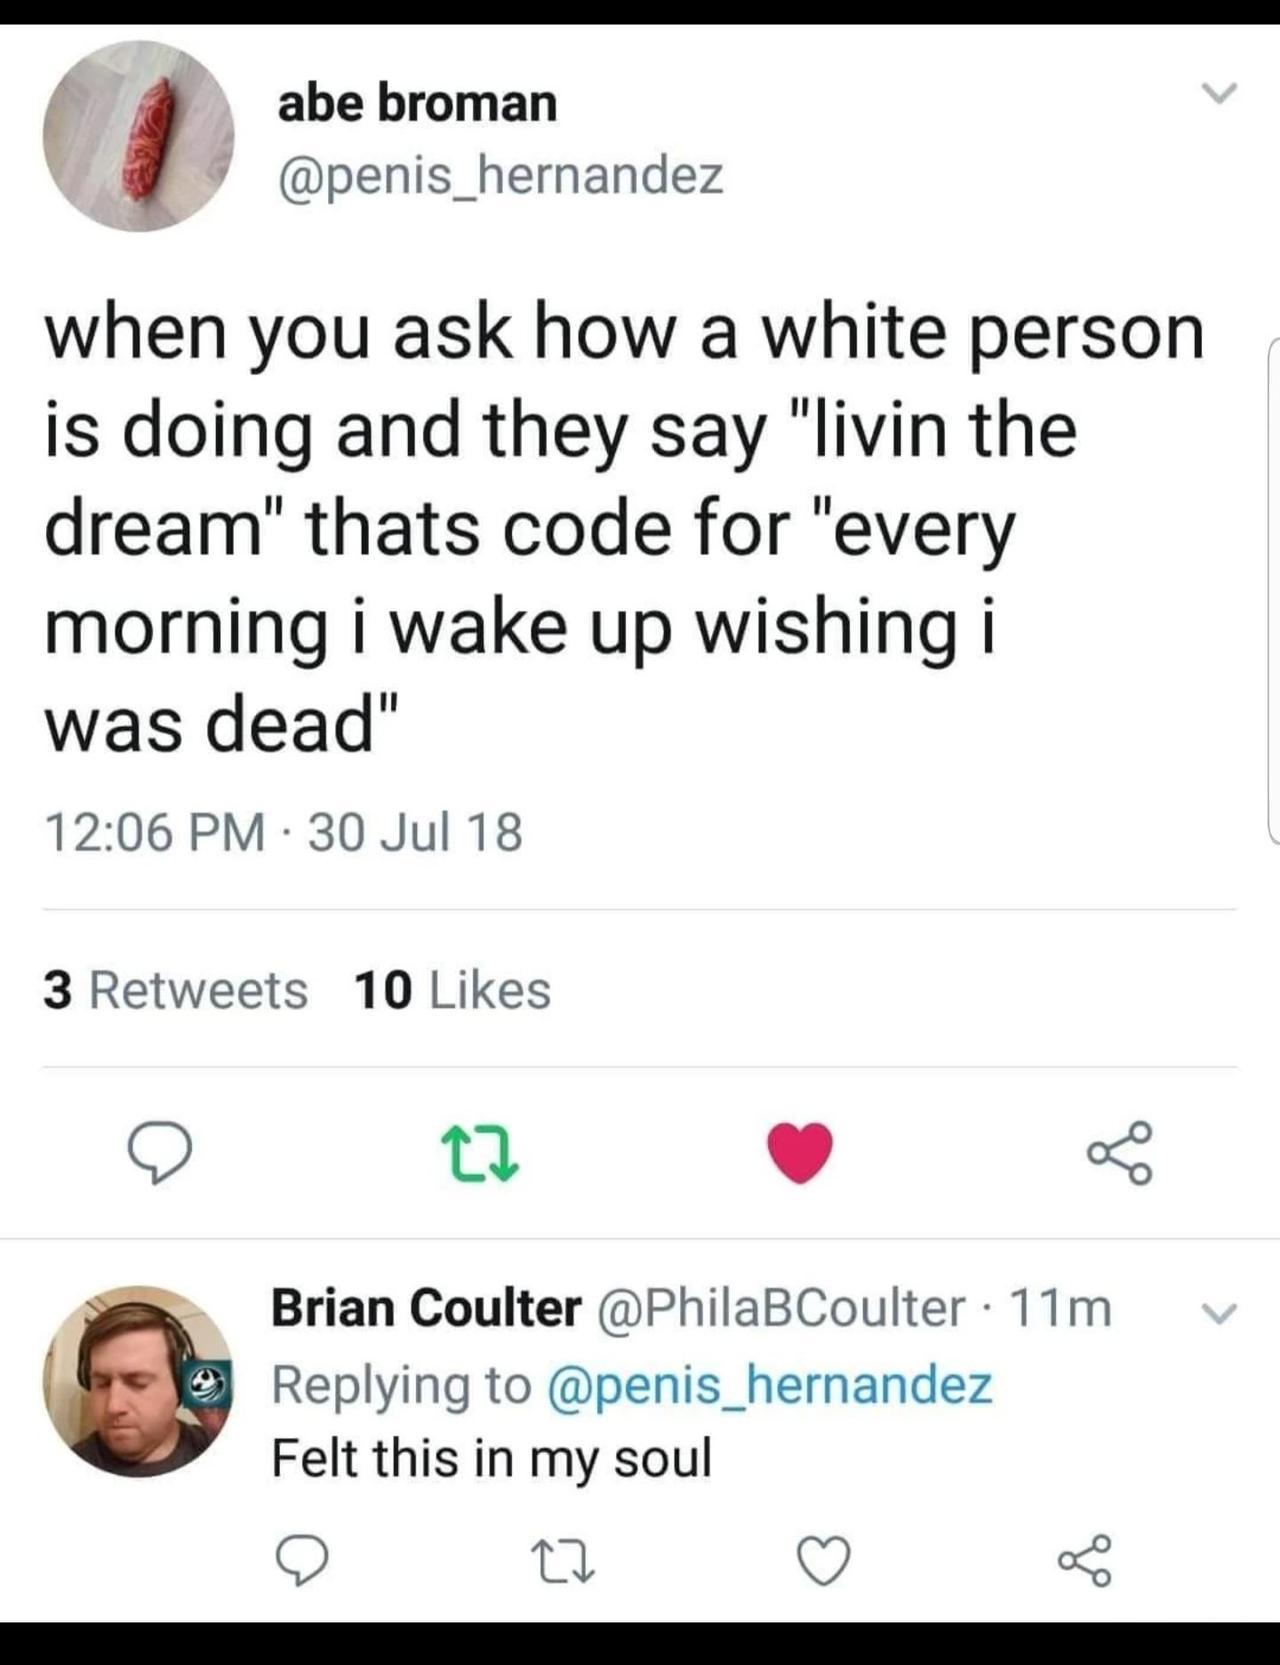 Depression meme - screenshot - abe broman when you ask how a white person is doing and they say "livin the dream" thats code for "every morning i wake up wishing i was dead" 30 Jul 18 3 10 v b e Brian Coulter 11m Felt this in my soul 22